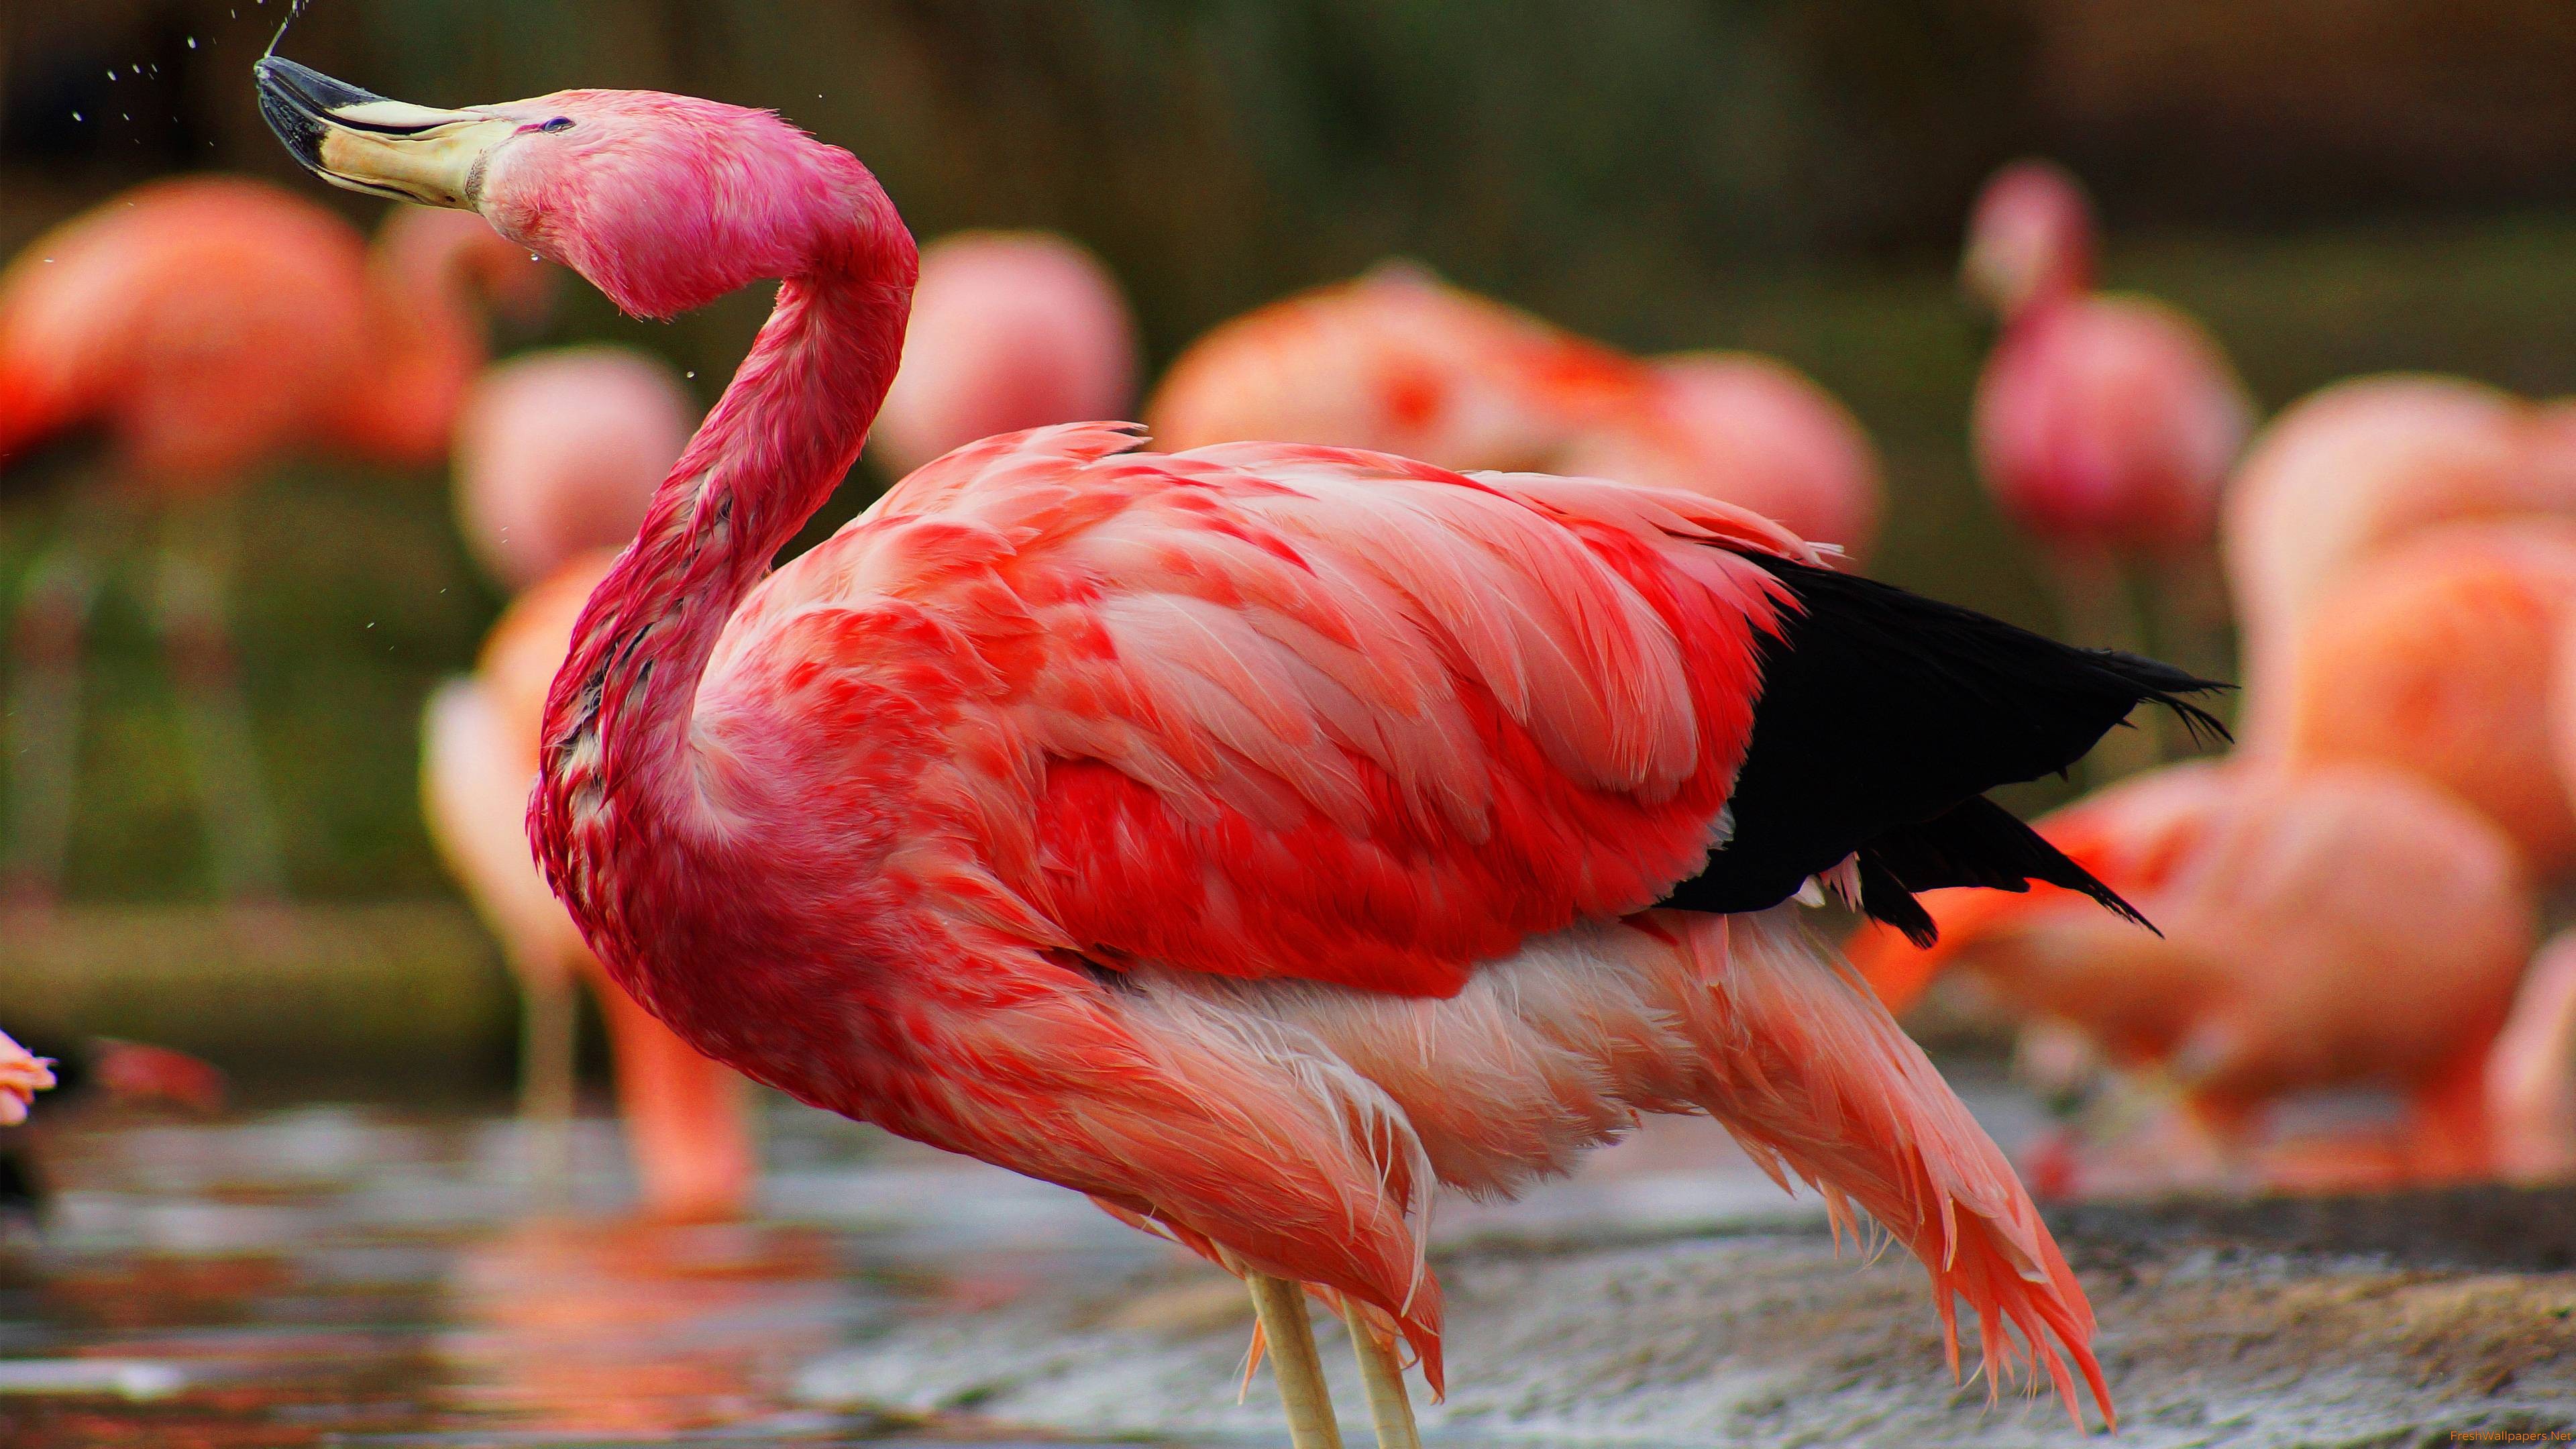 Red Flamingo wallpapers | Freshwallpapers